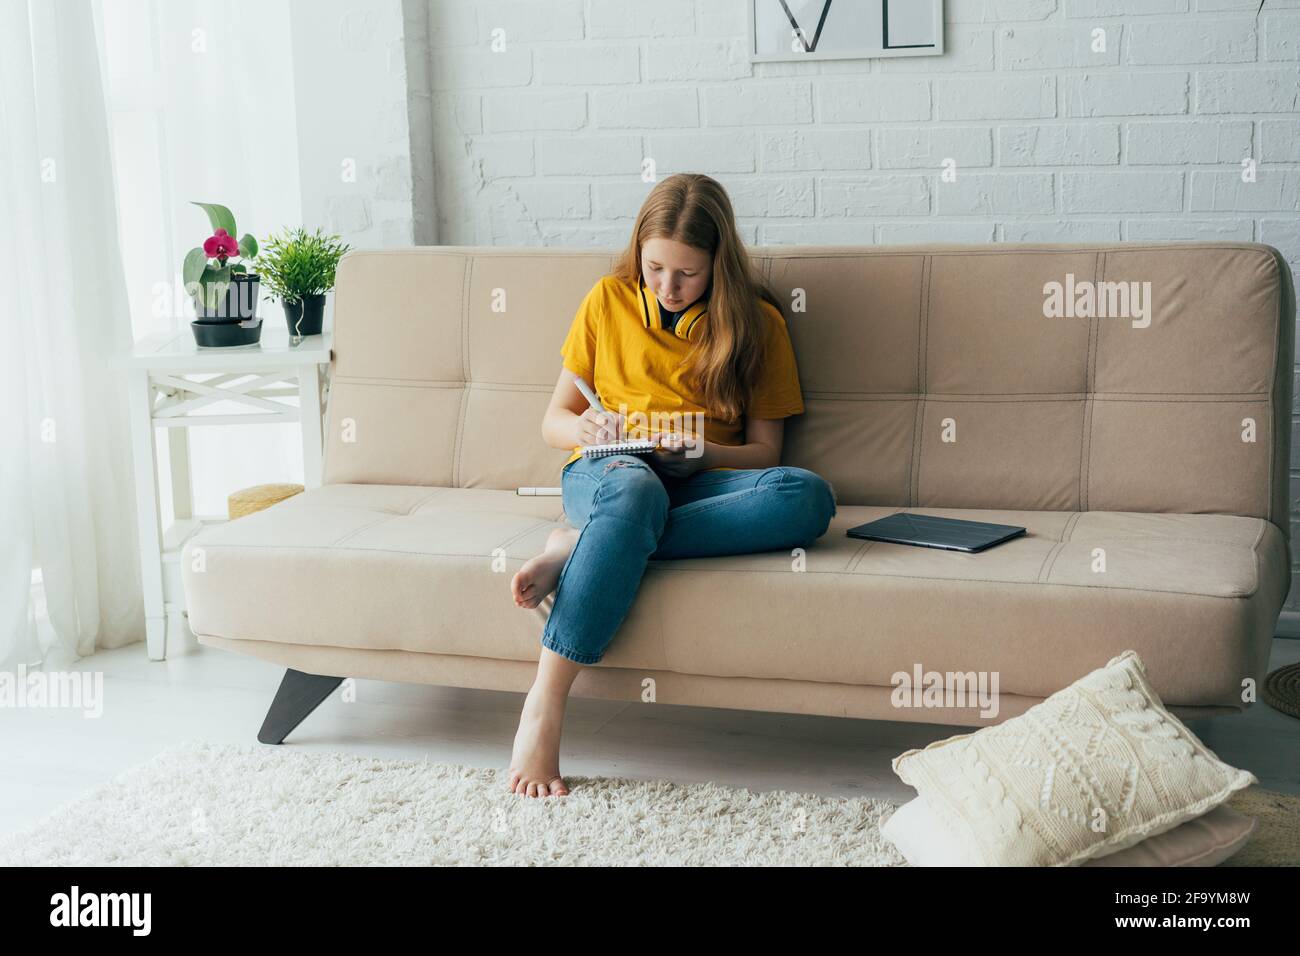 Girl schoolgirl teenager sitting on the couch draws a sketch in a notebook. Stock Photo